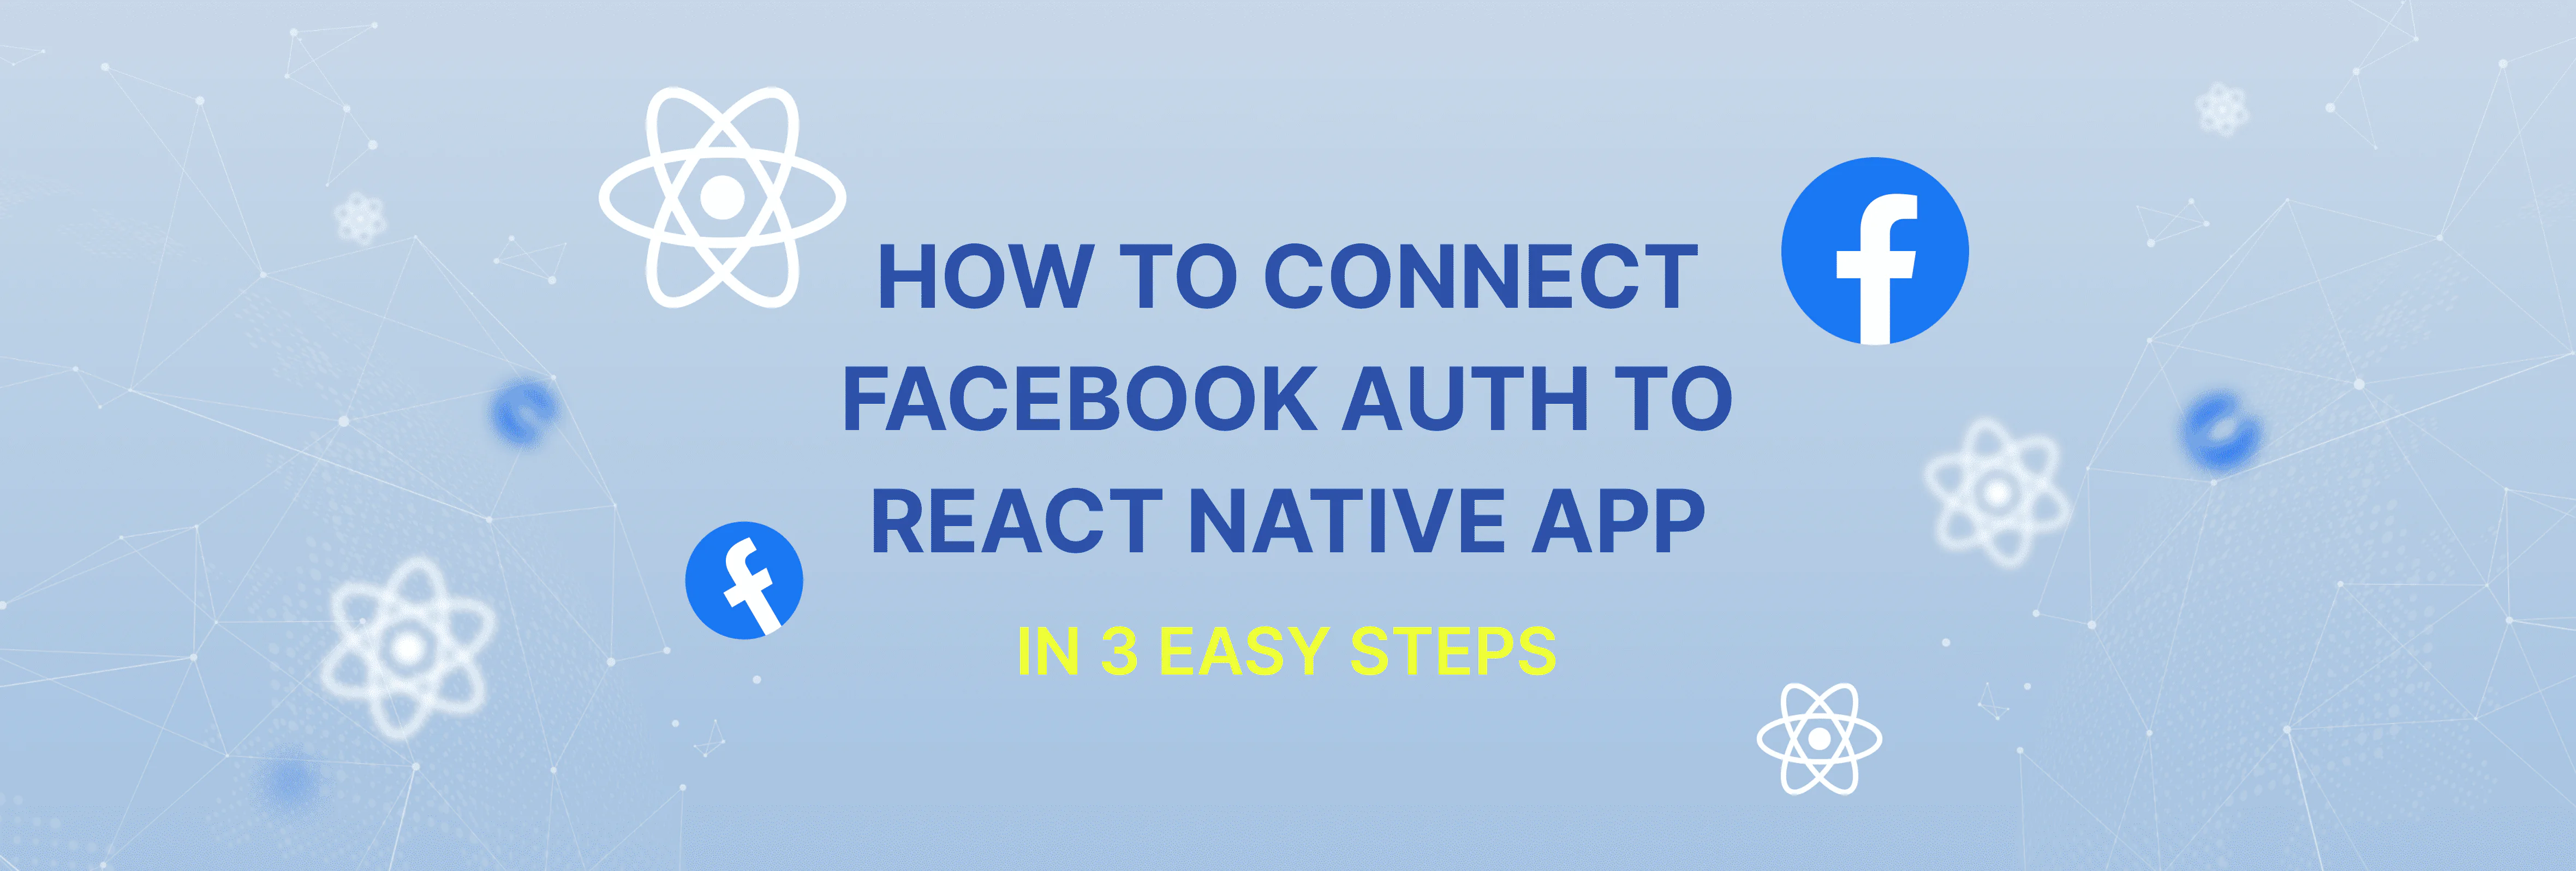 Improving Login With Facebook User Experience With Native Login